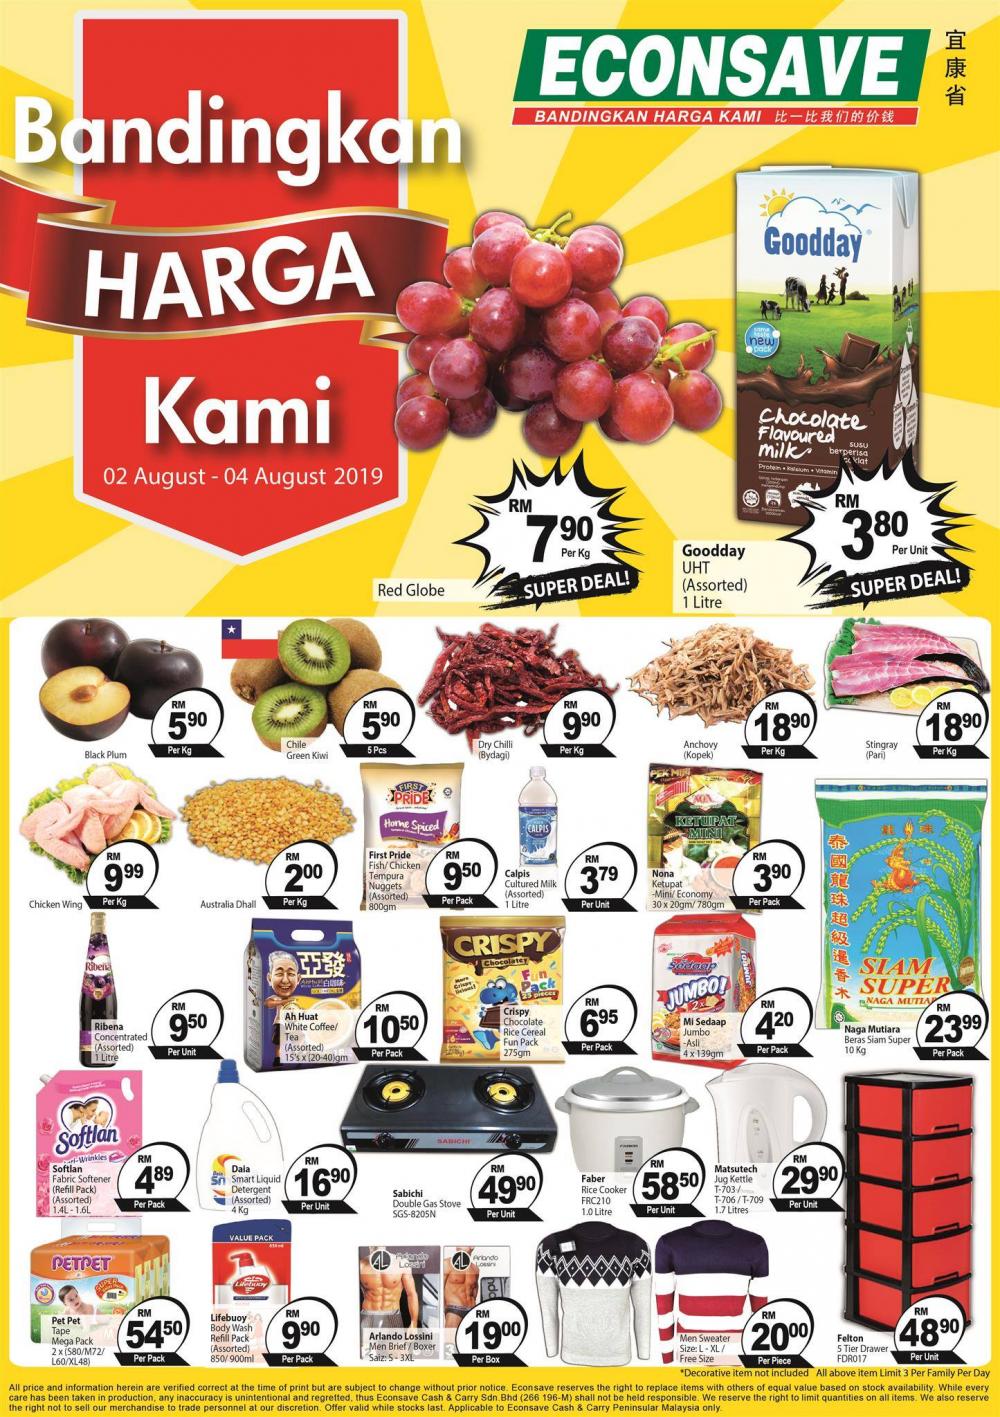 Econsave Weekend Promotion (2 August 2019 - 4 August 2019)